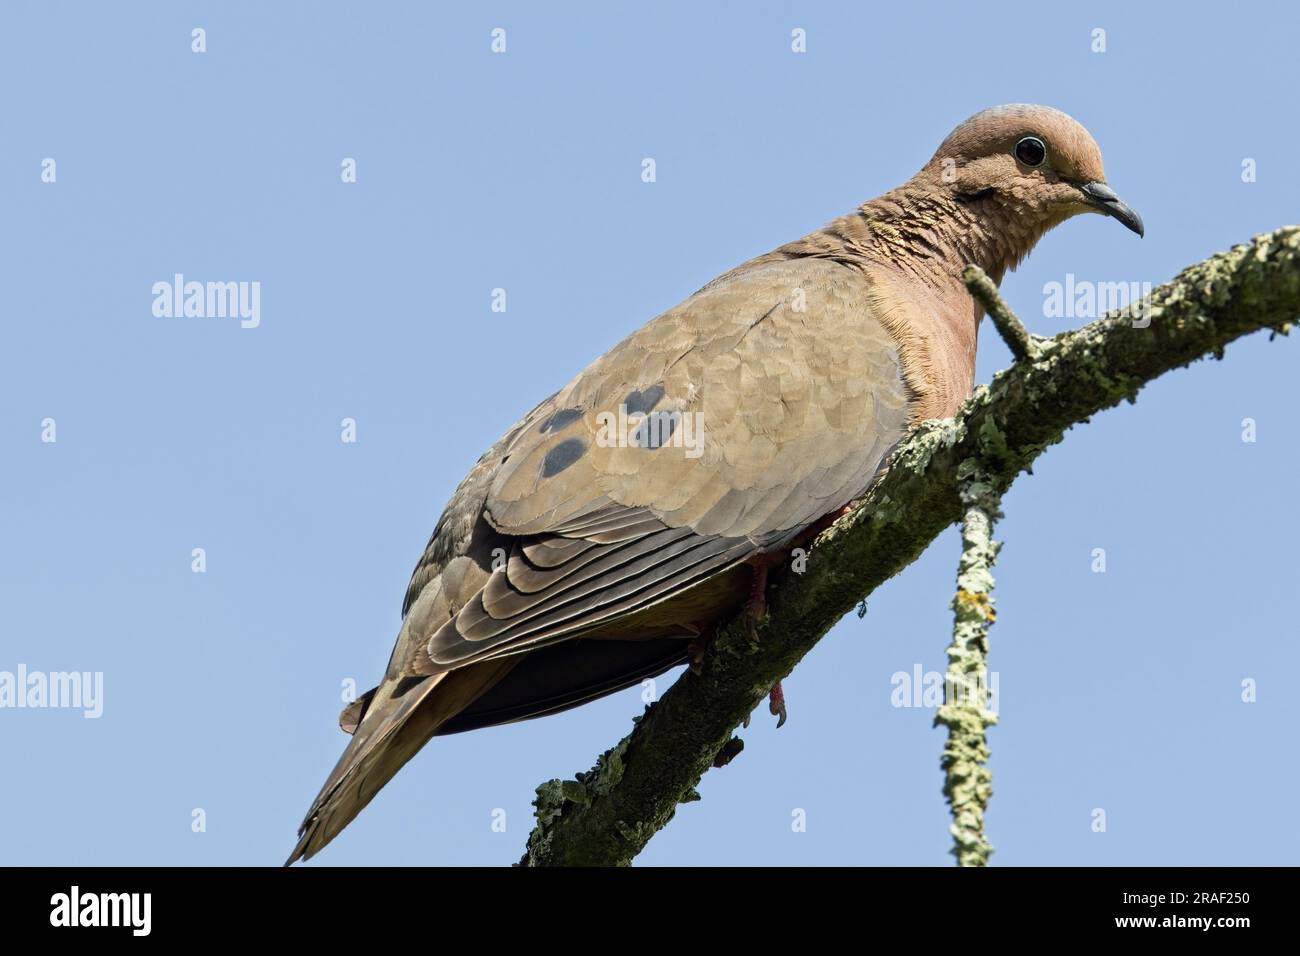 Eared Dove (Zenaida auriculata), perched on a branch against a blue sky, very close, Botanic Gardens, Bogota, Colombia. Stock Photo